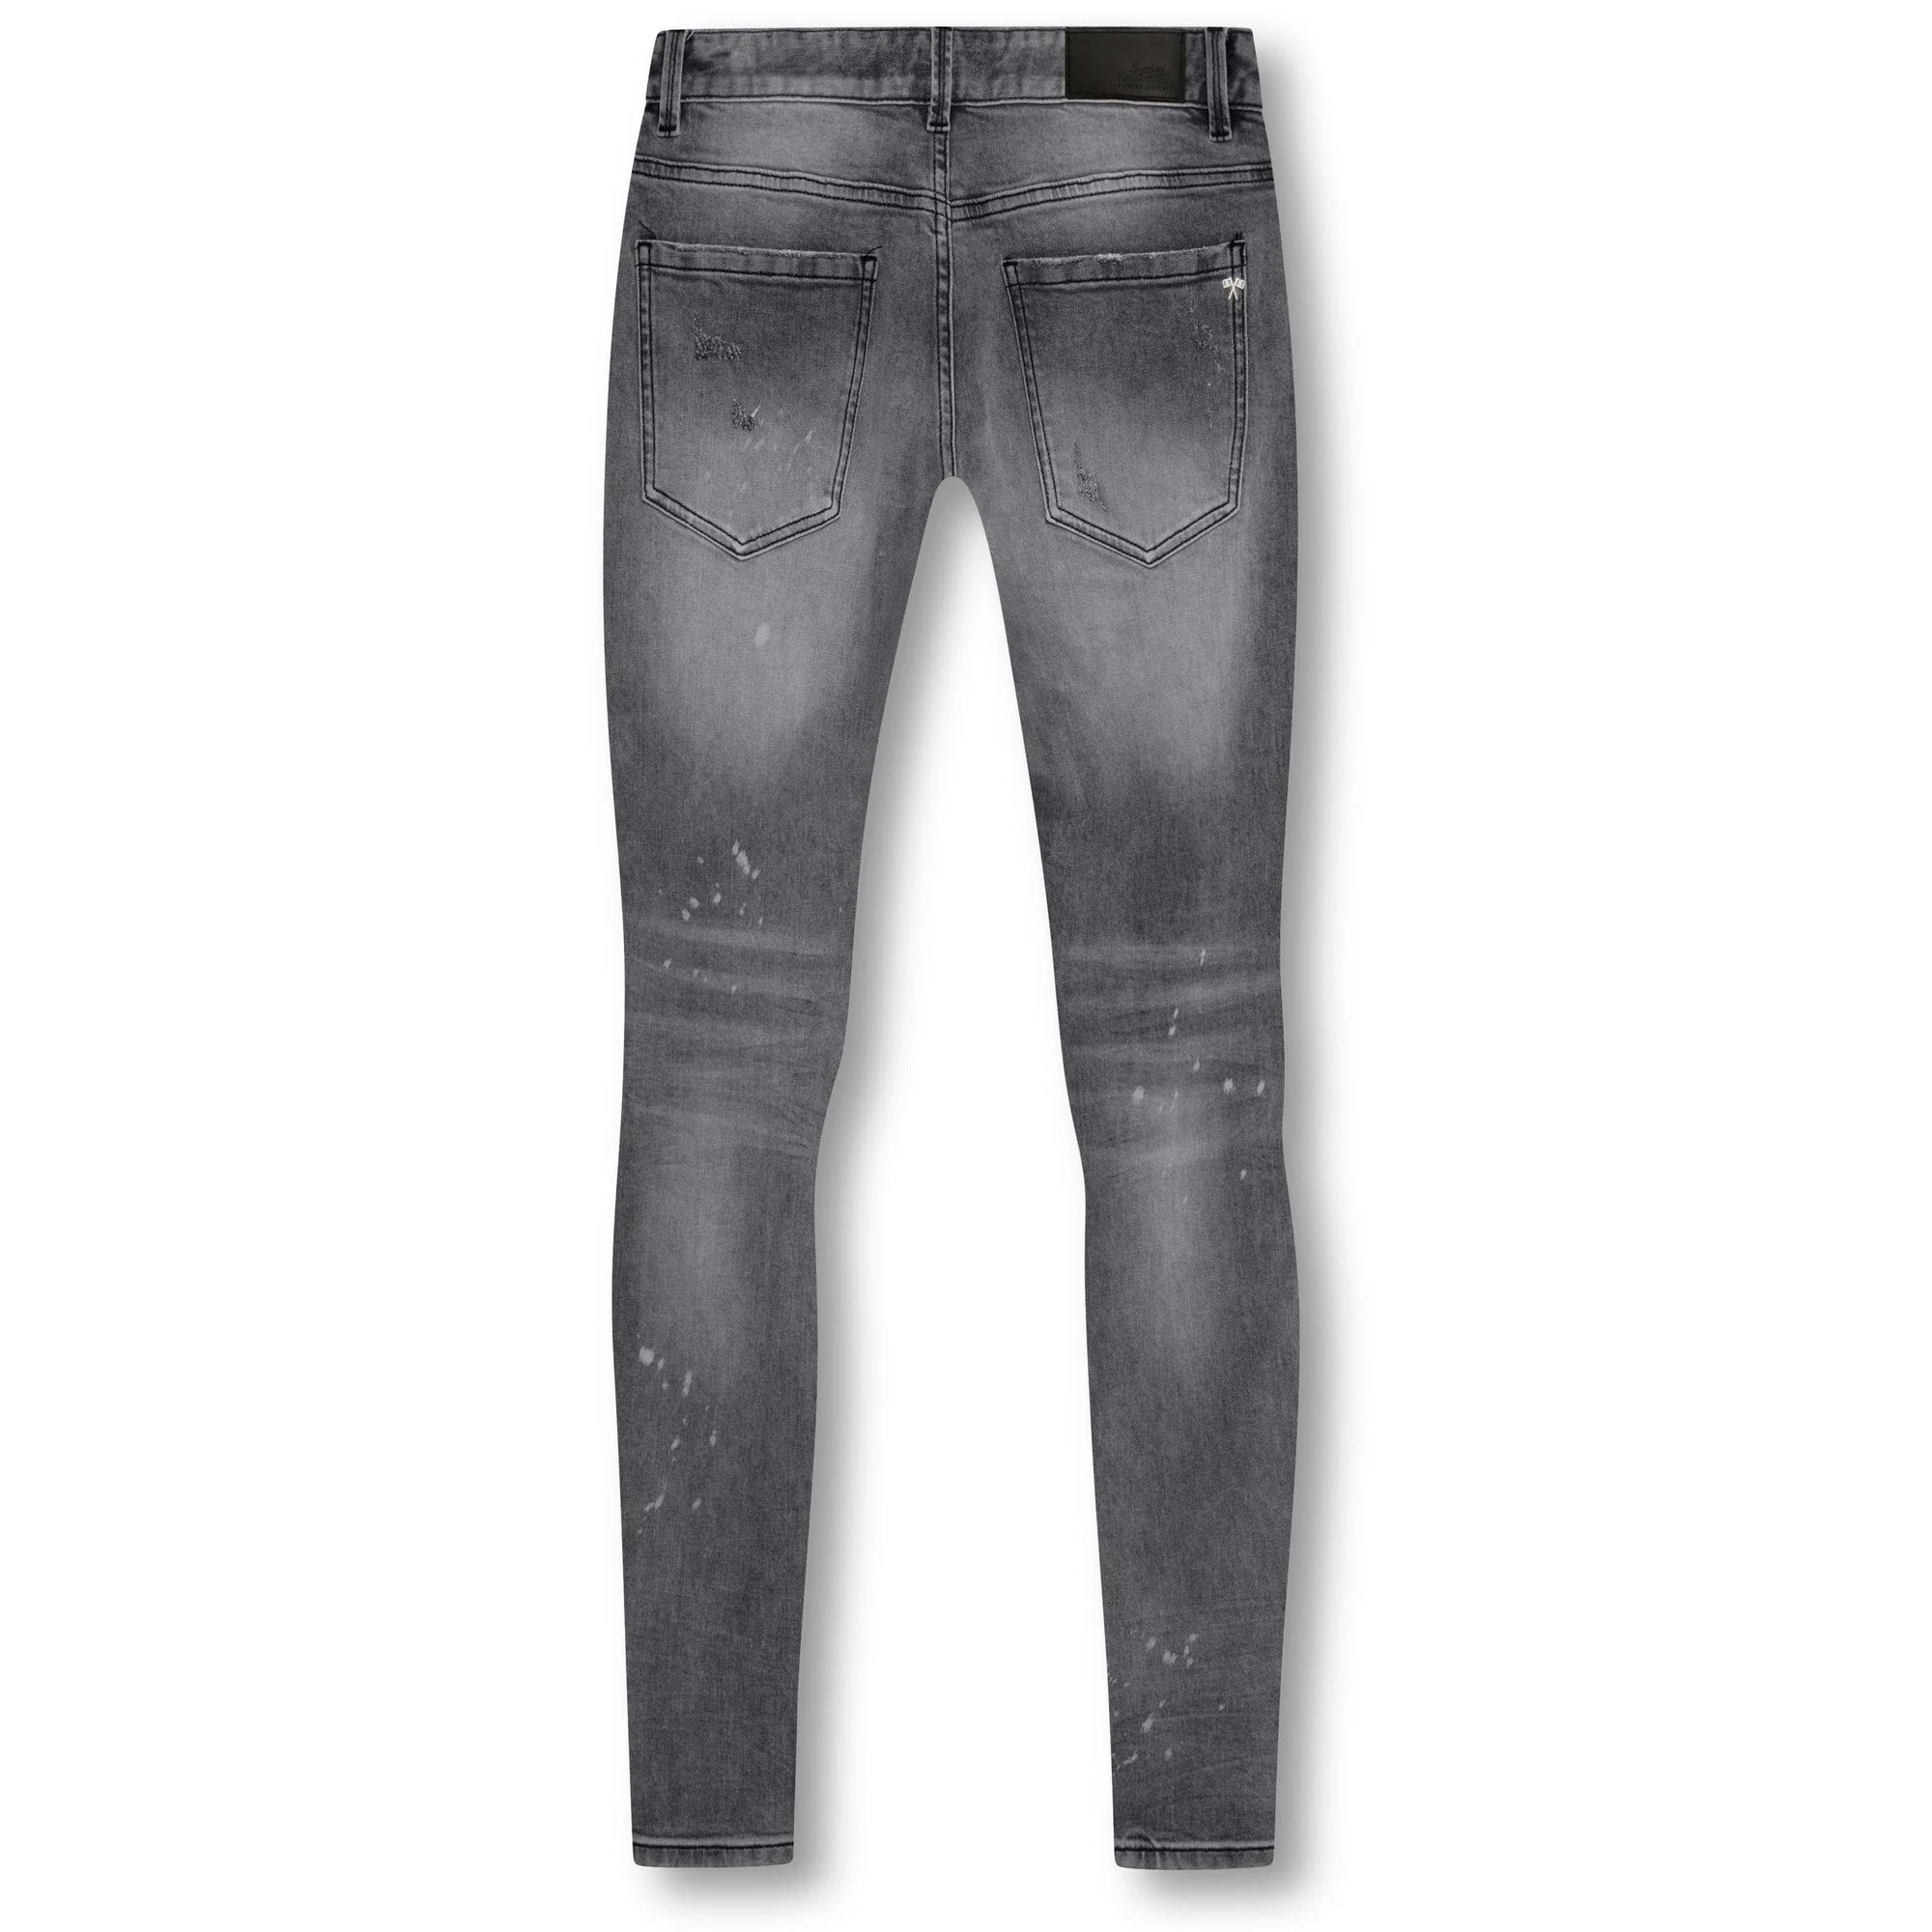 Amicci Colombo Ripped Denim Jeans